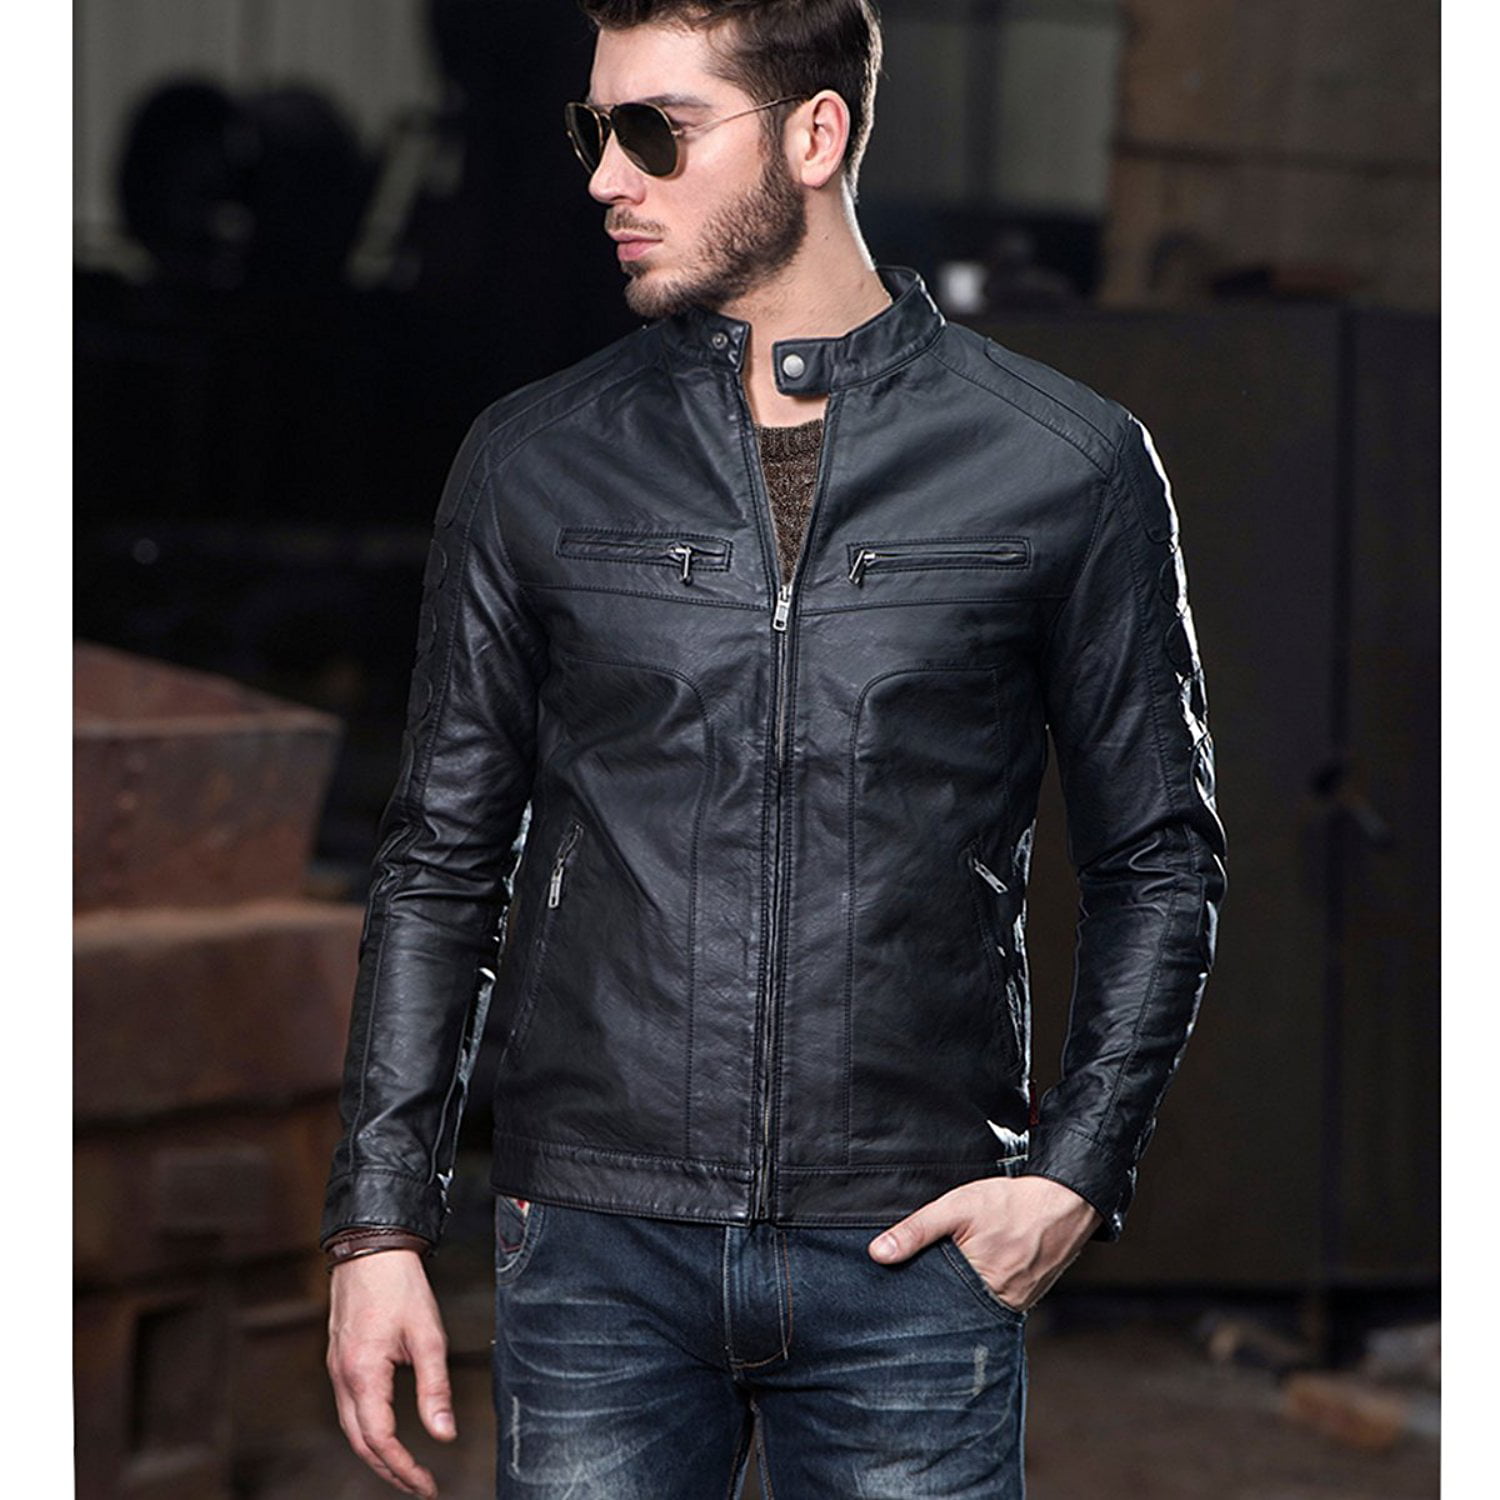 Fairylinks Mens Casual Faux Leather Jacket